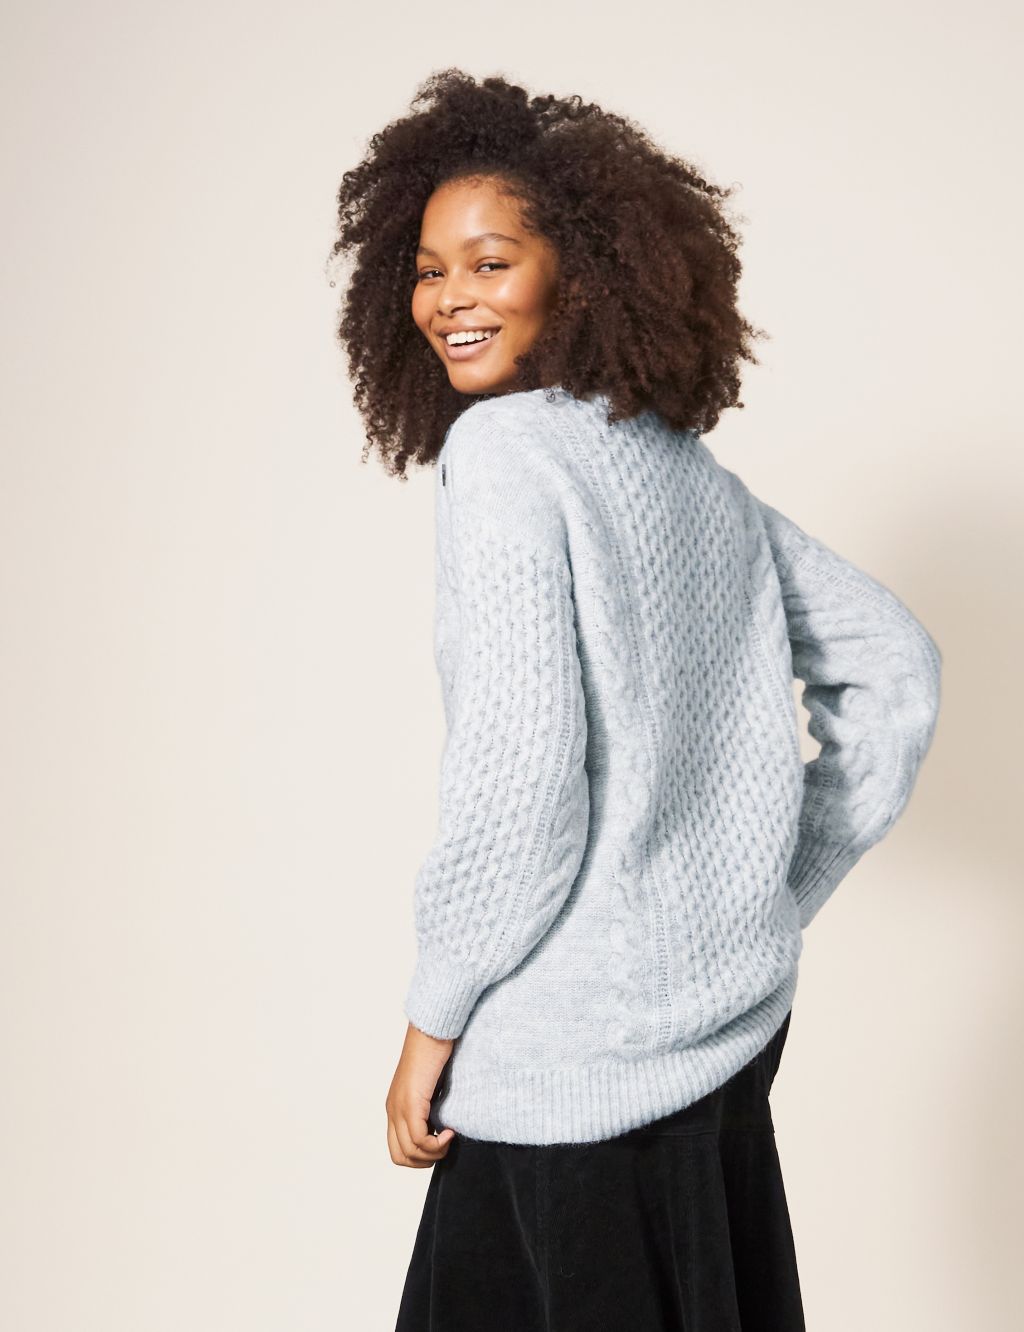 Crew Neck Longline Jumper with Wool image 4